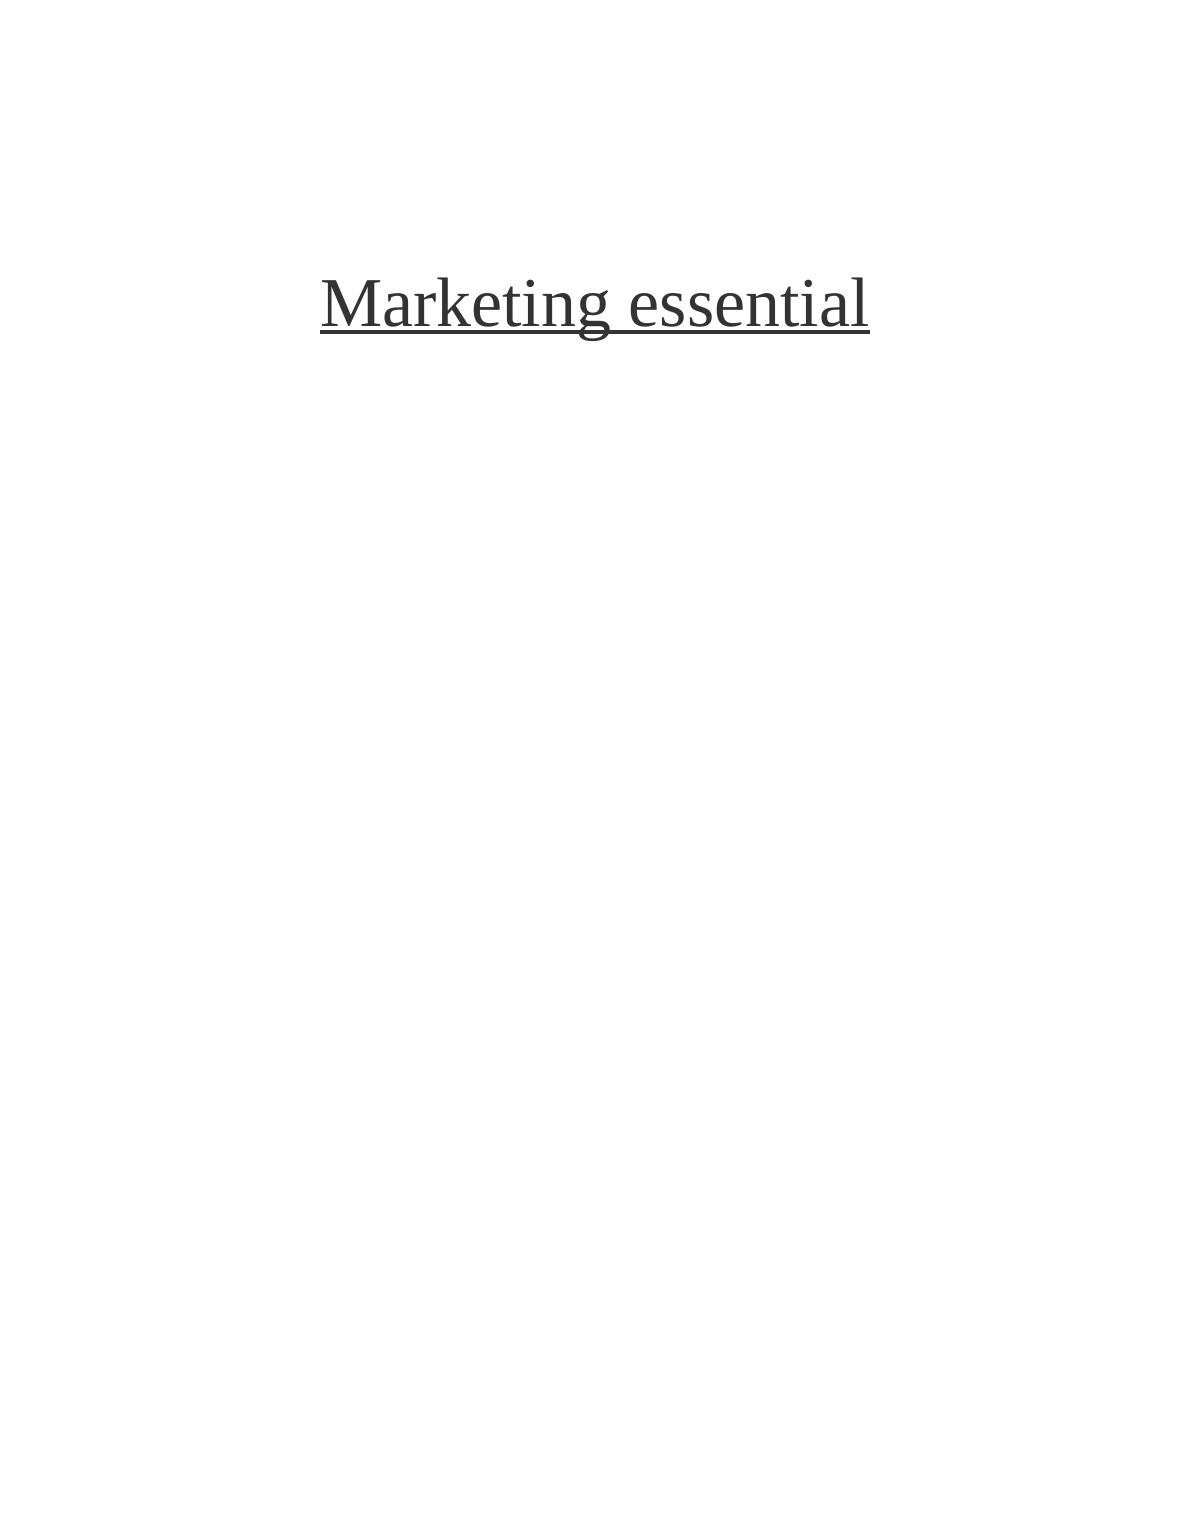 Marketing Essential of Thomas cook group plc - Assignment_1